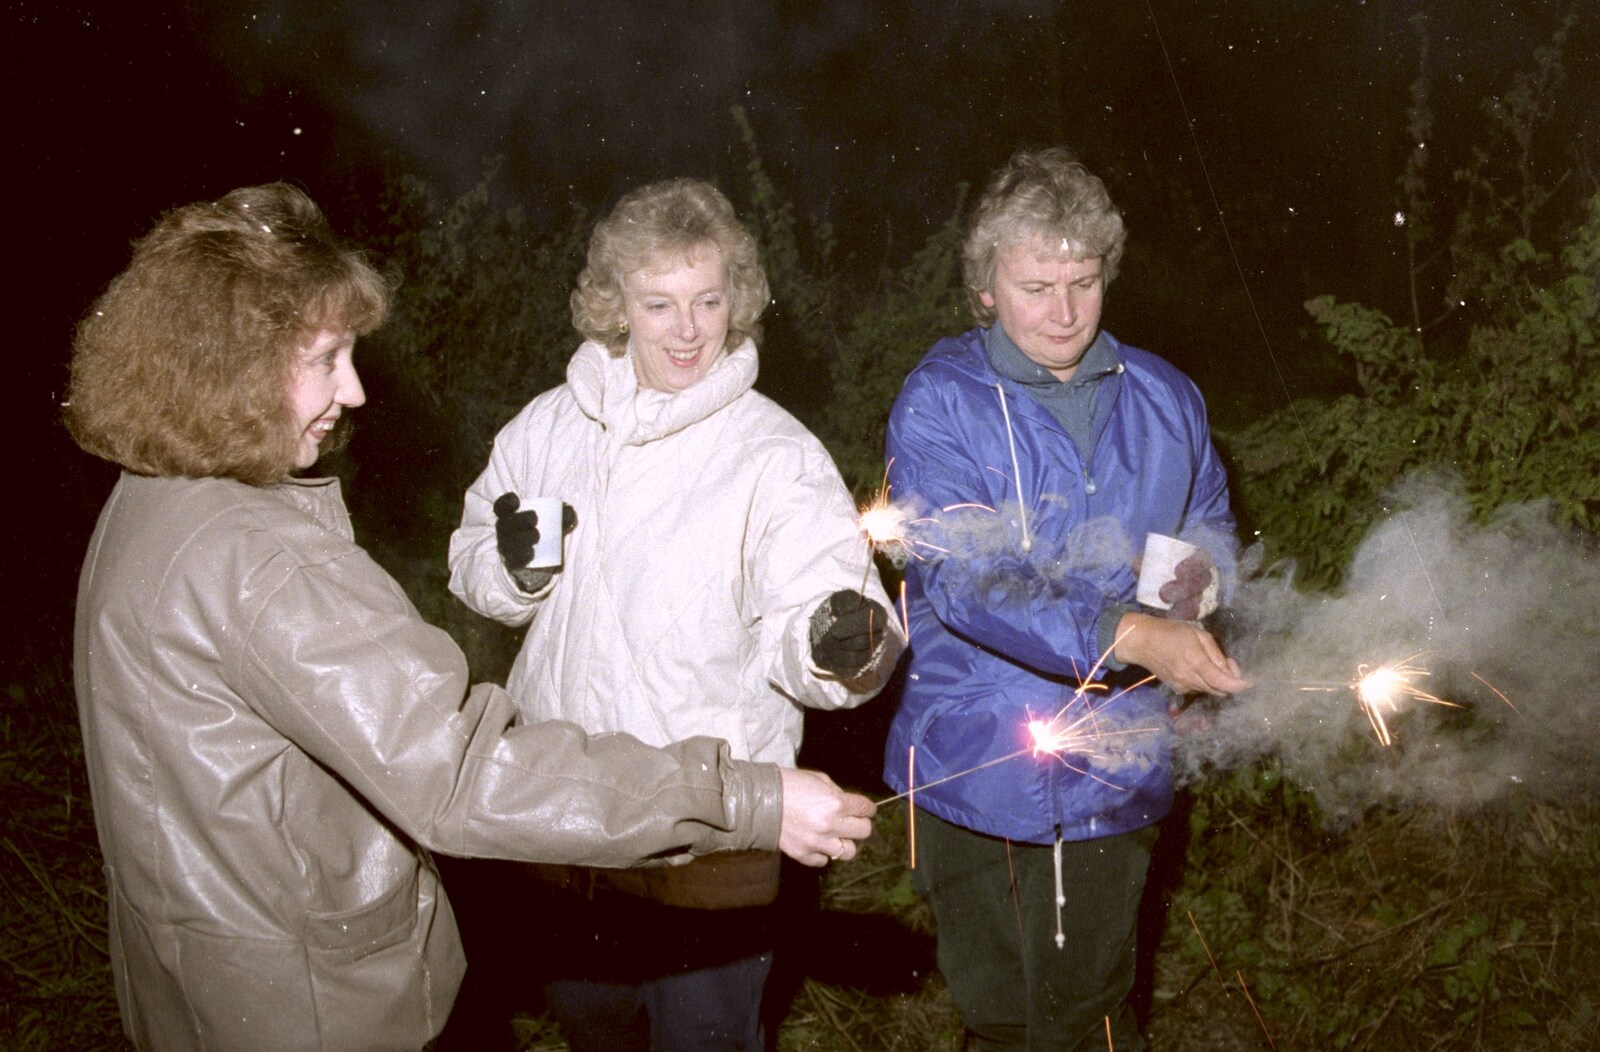 Monique, Jean and Linda do sparklers from Bonfire Night and Printec at the Stoke Ash White Horse, Suffolk - 5th November 1991